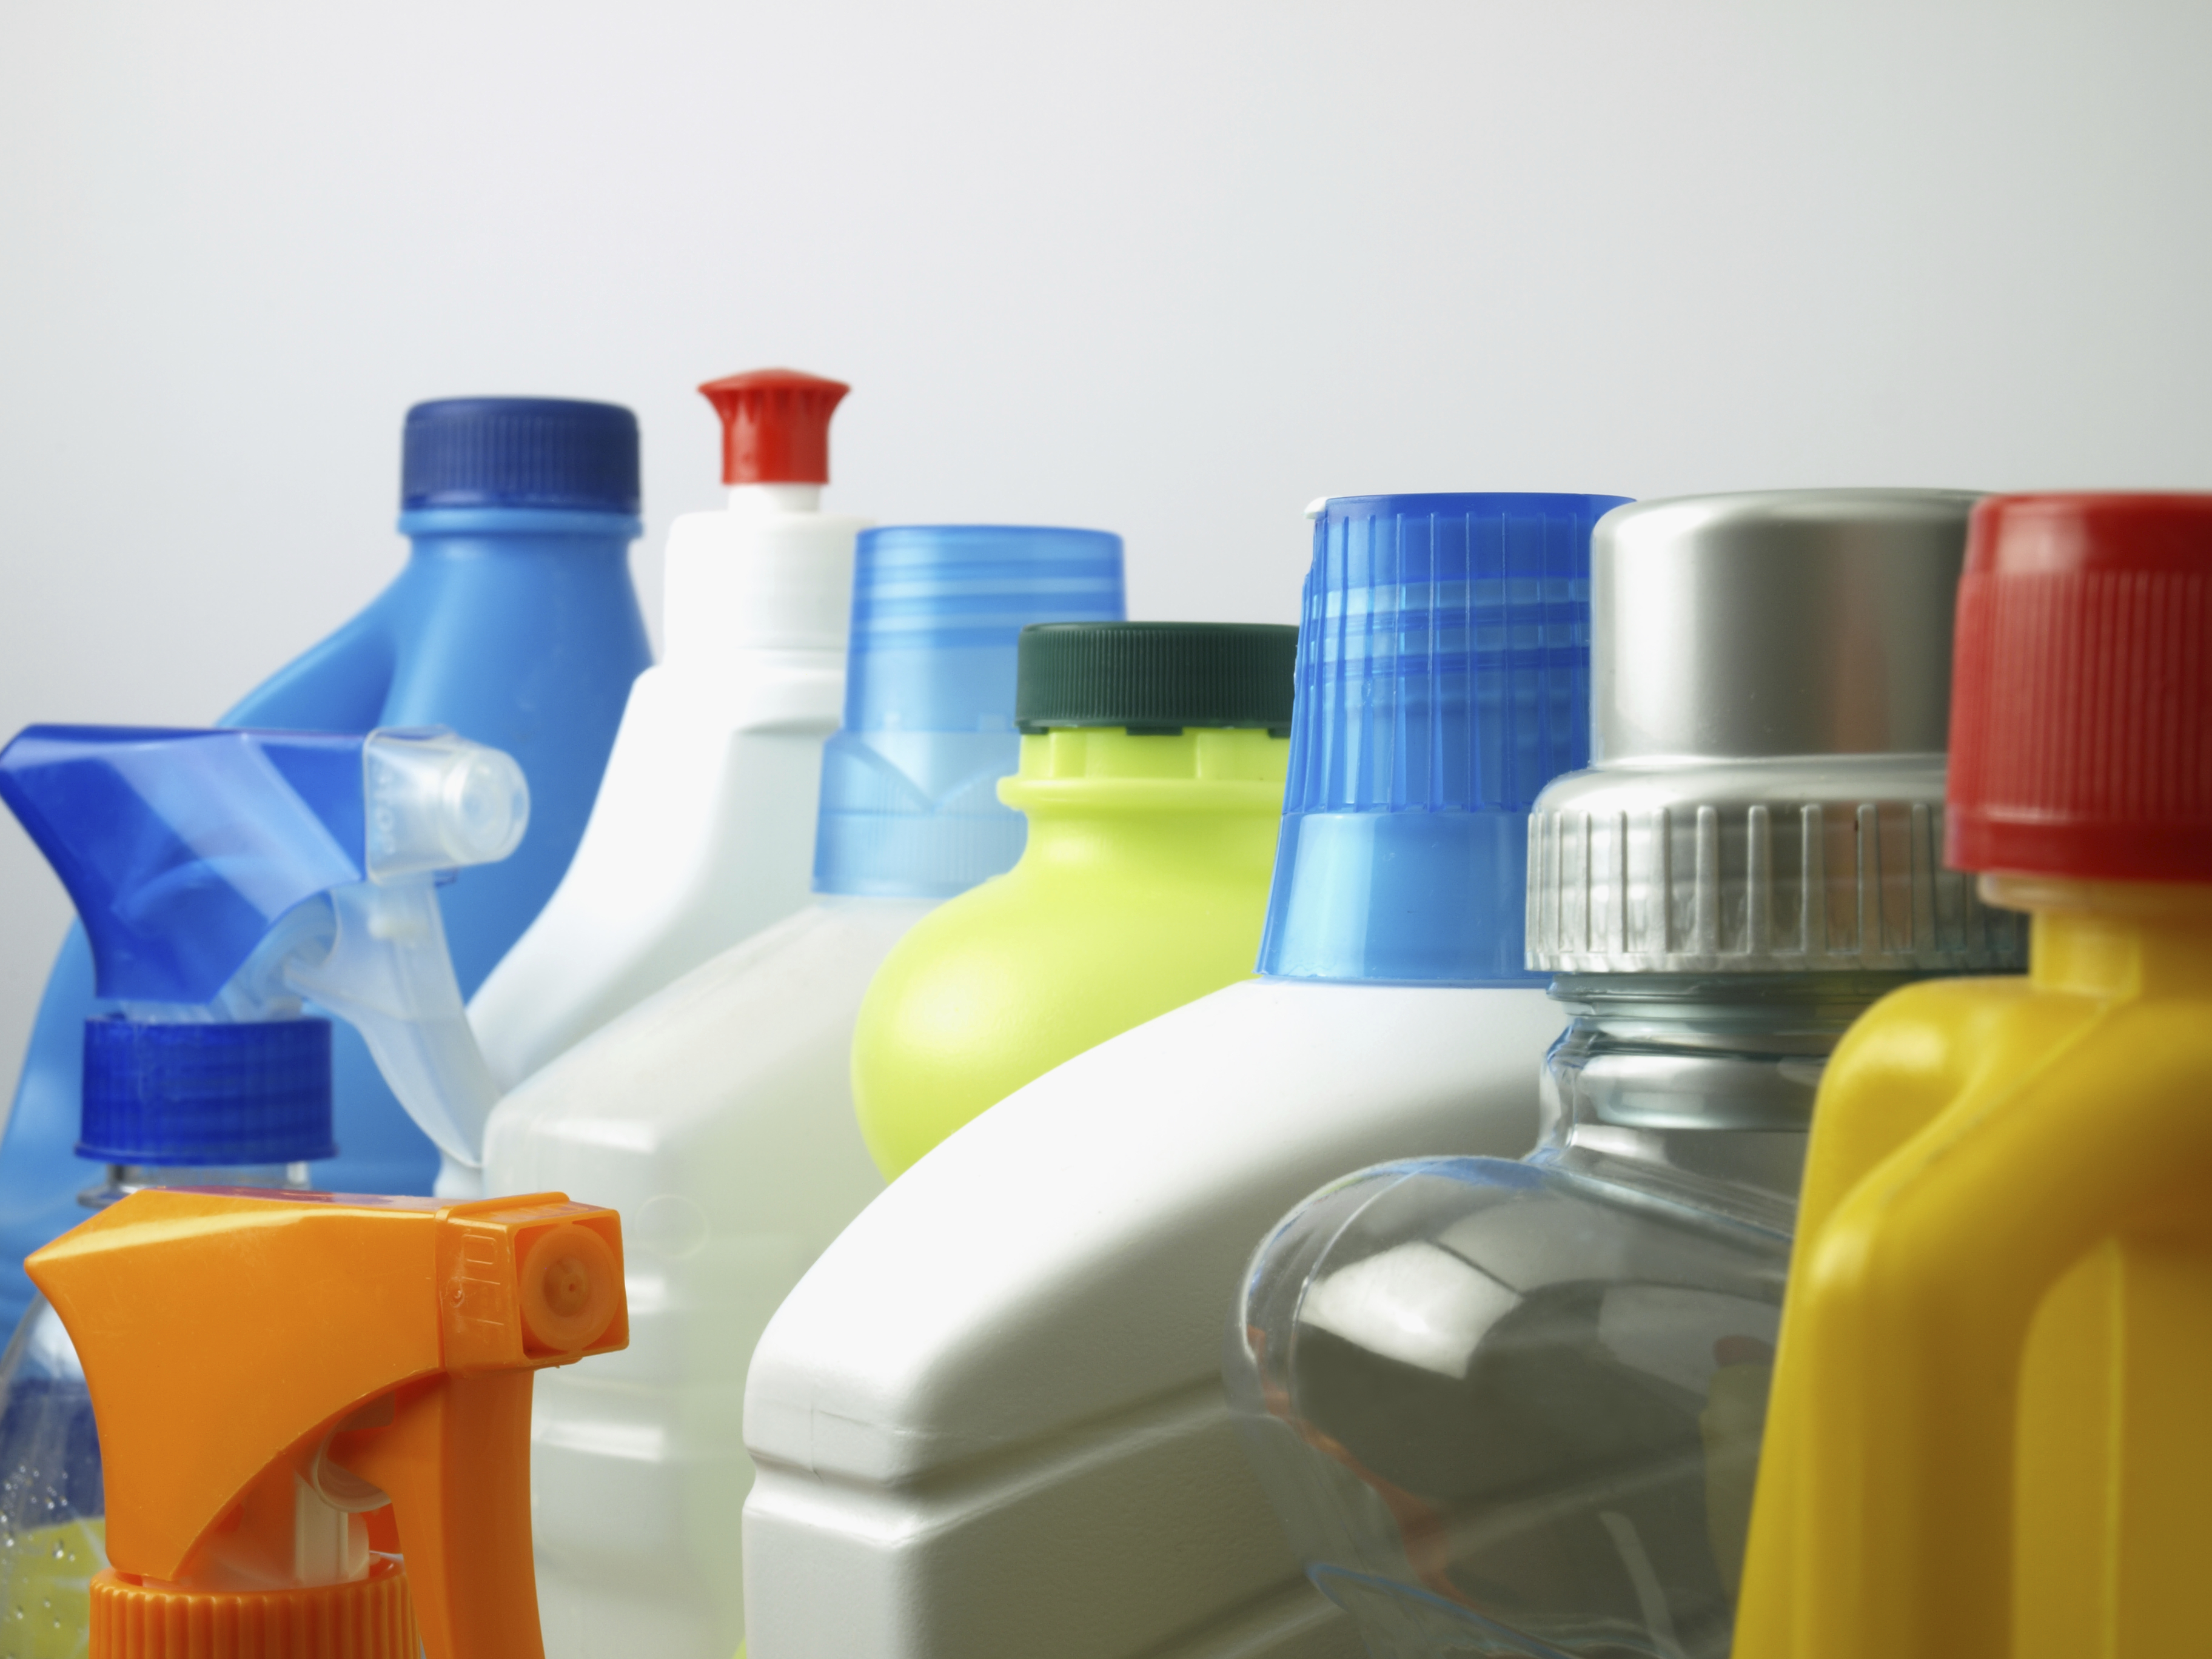 Cleaning Products, photo: istock alexdans